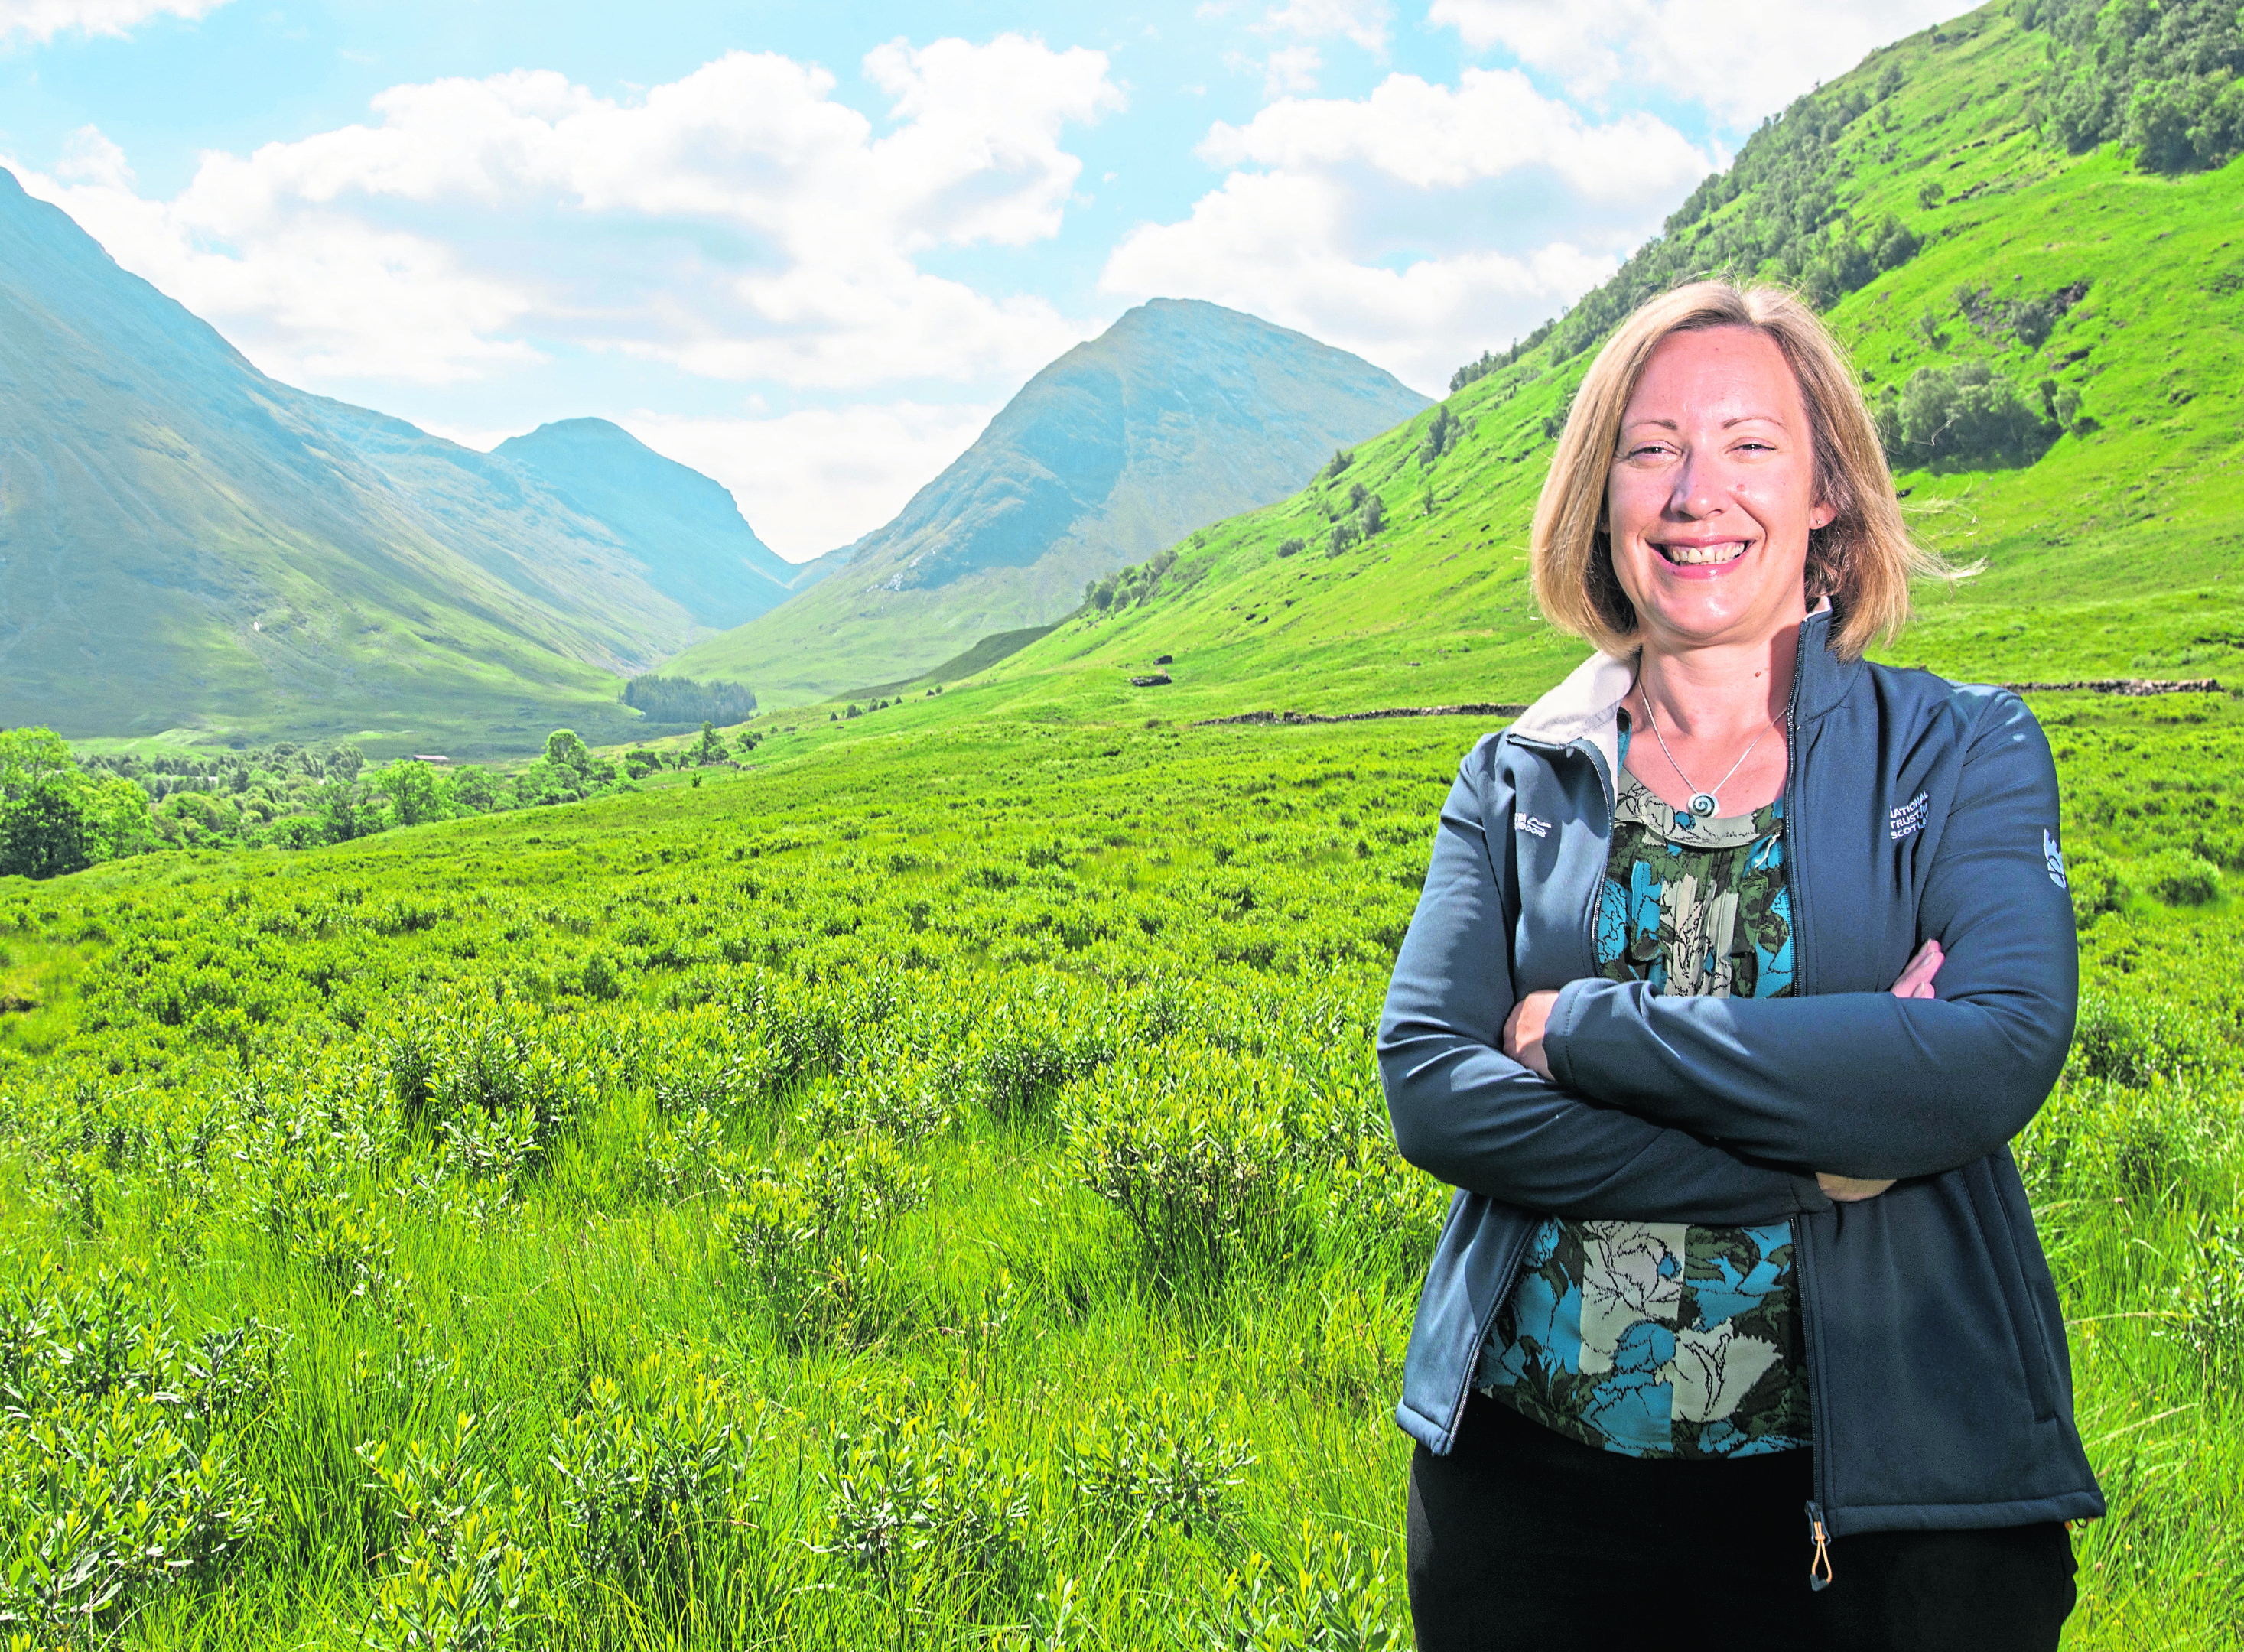 Clea Warner, General Manager at the National Trust for Scotland North West Region